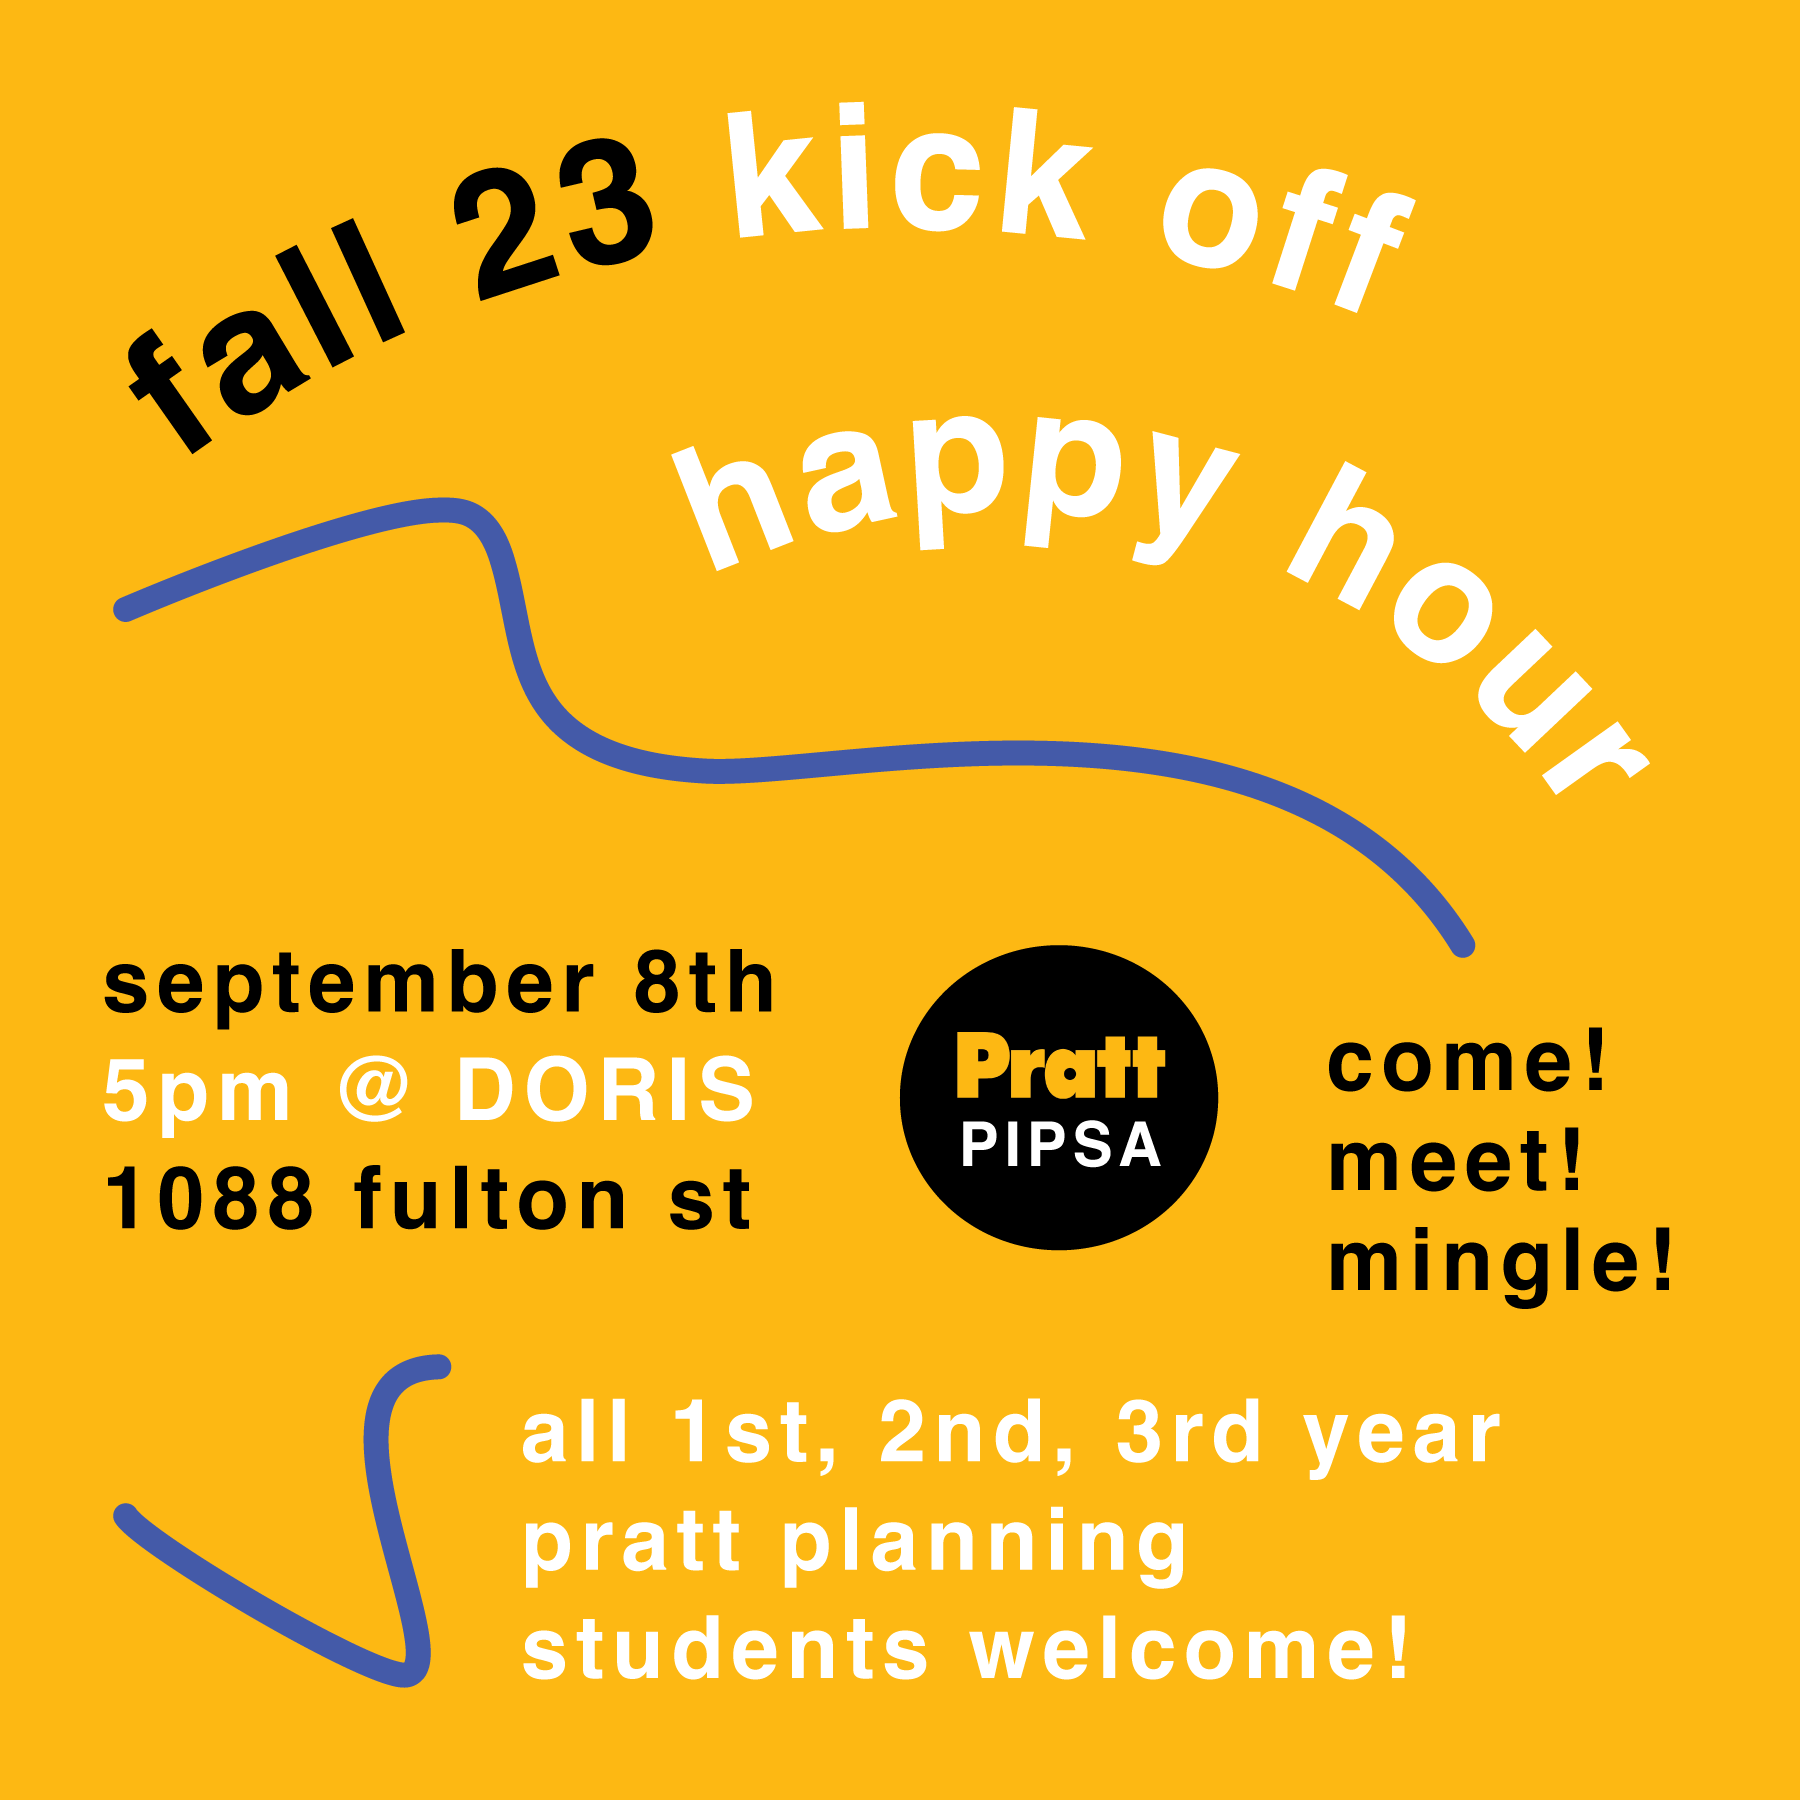 Poster for the Pratt PIPSA happy hour event on September 8th. This information is typed on top of a yellow background.